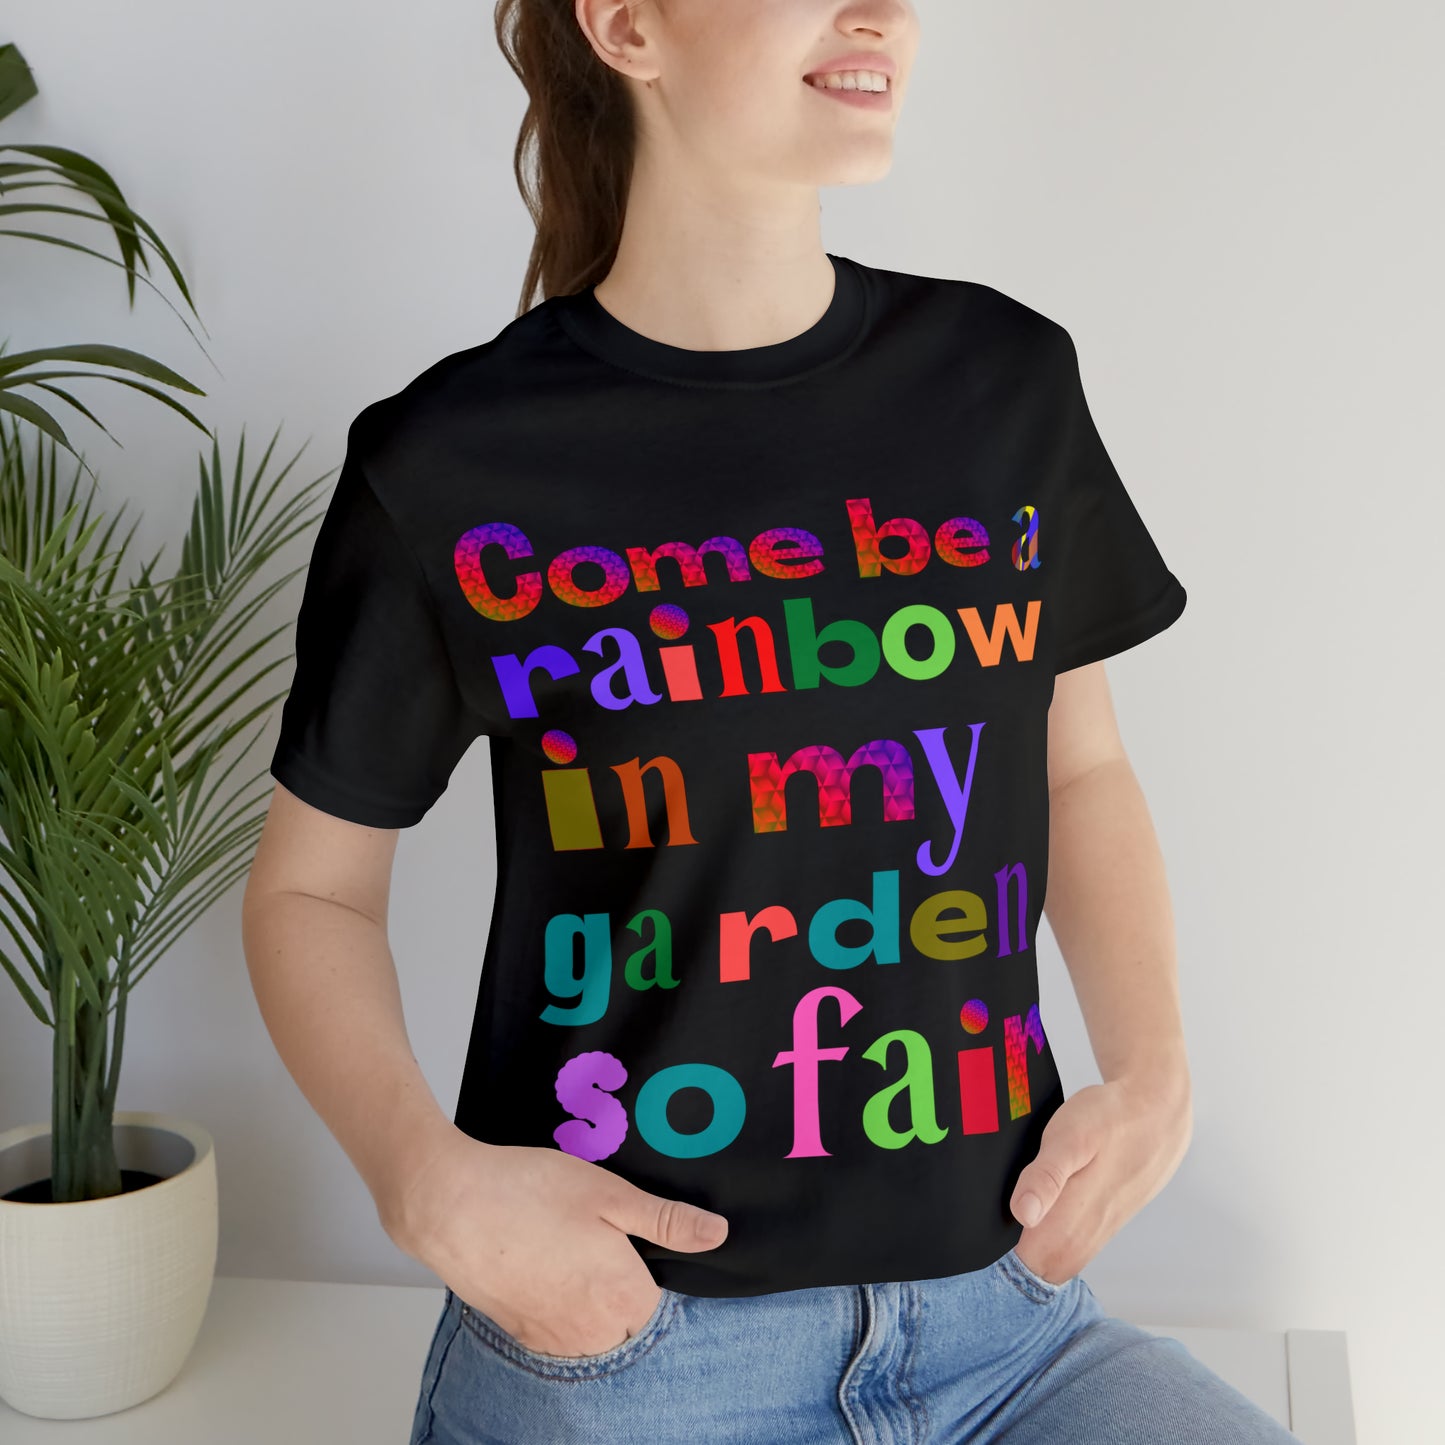 Come Be a Rainbow - Unisex Jersey Short Sleeve Tee